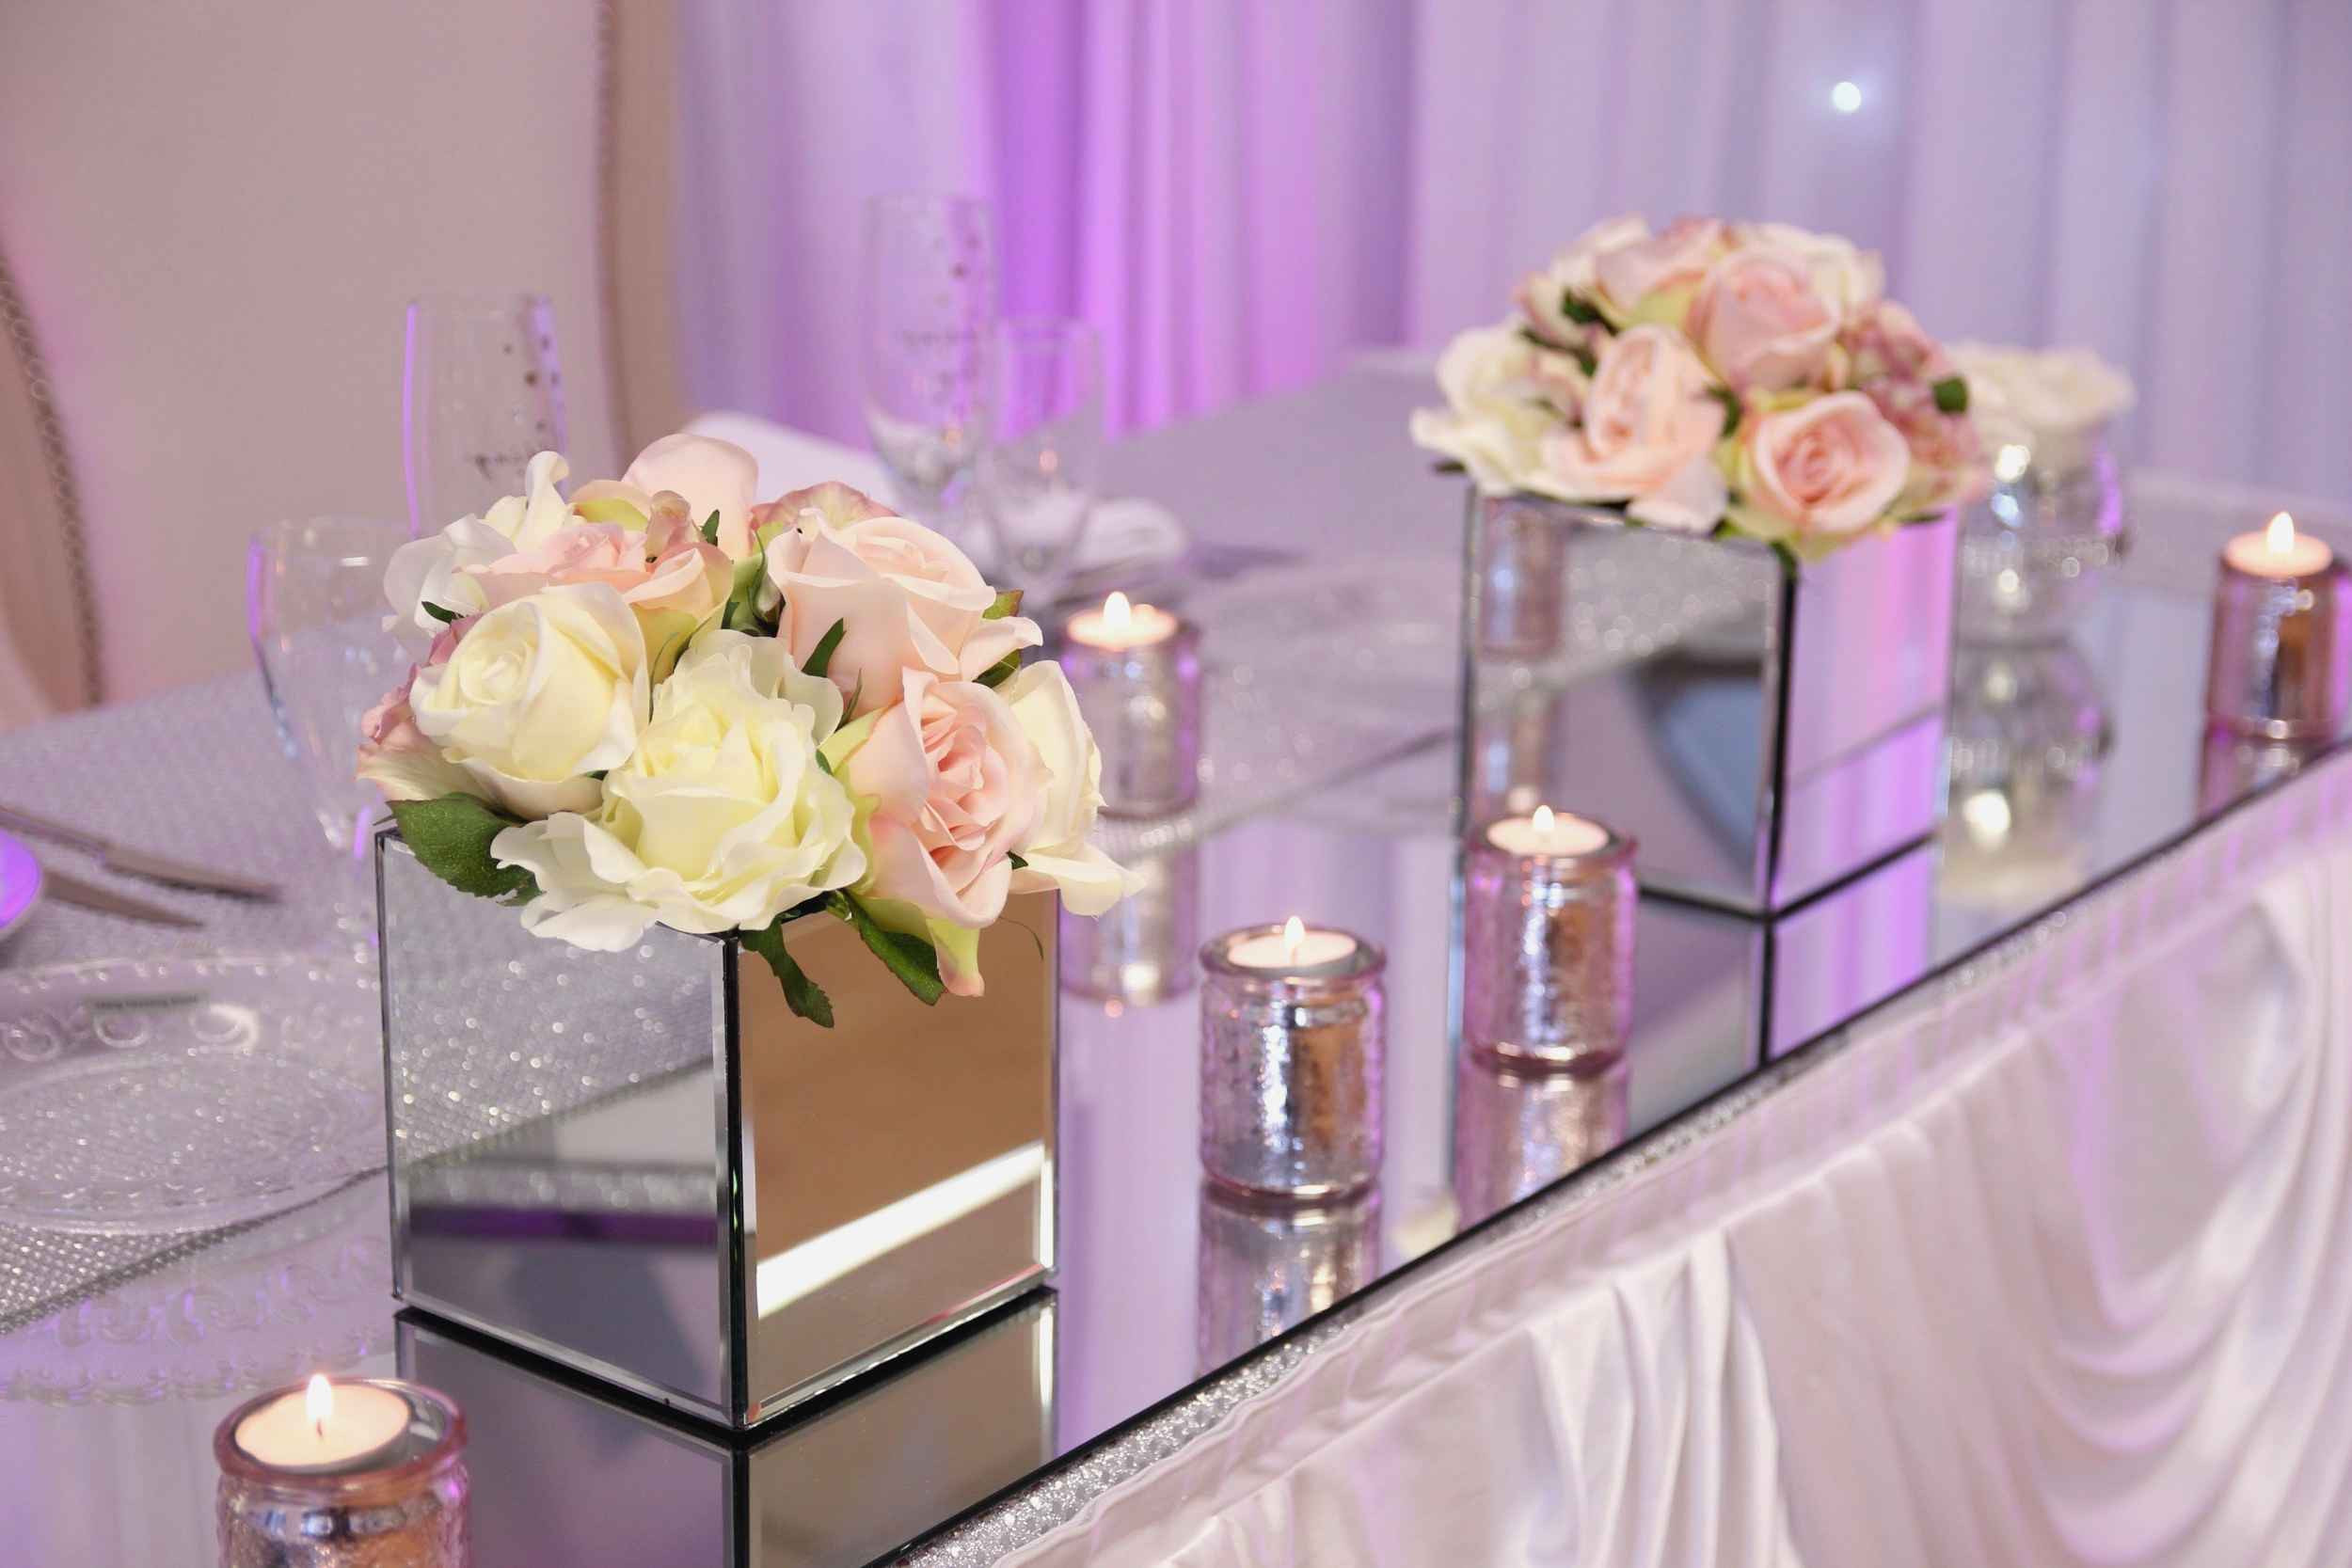 19 Fashionable 4 Inch Cube Vase 2022 free download 4 inch cube vase of amazing purple and silver wedding ideas wedding theme in purple and lavender wedding decorations best mirror vase 8 1h vases mirrored square cube riser inch